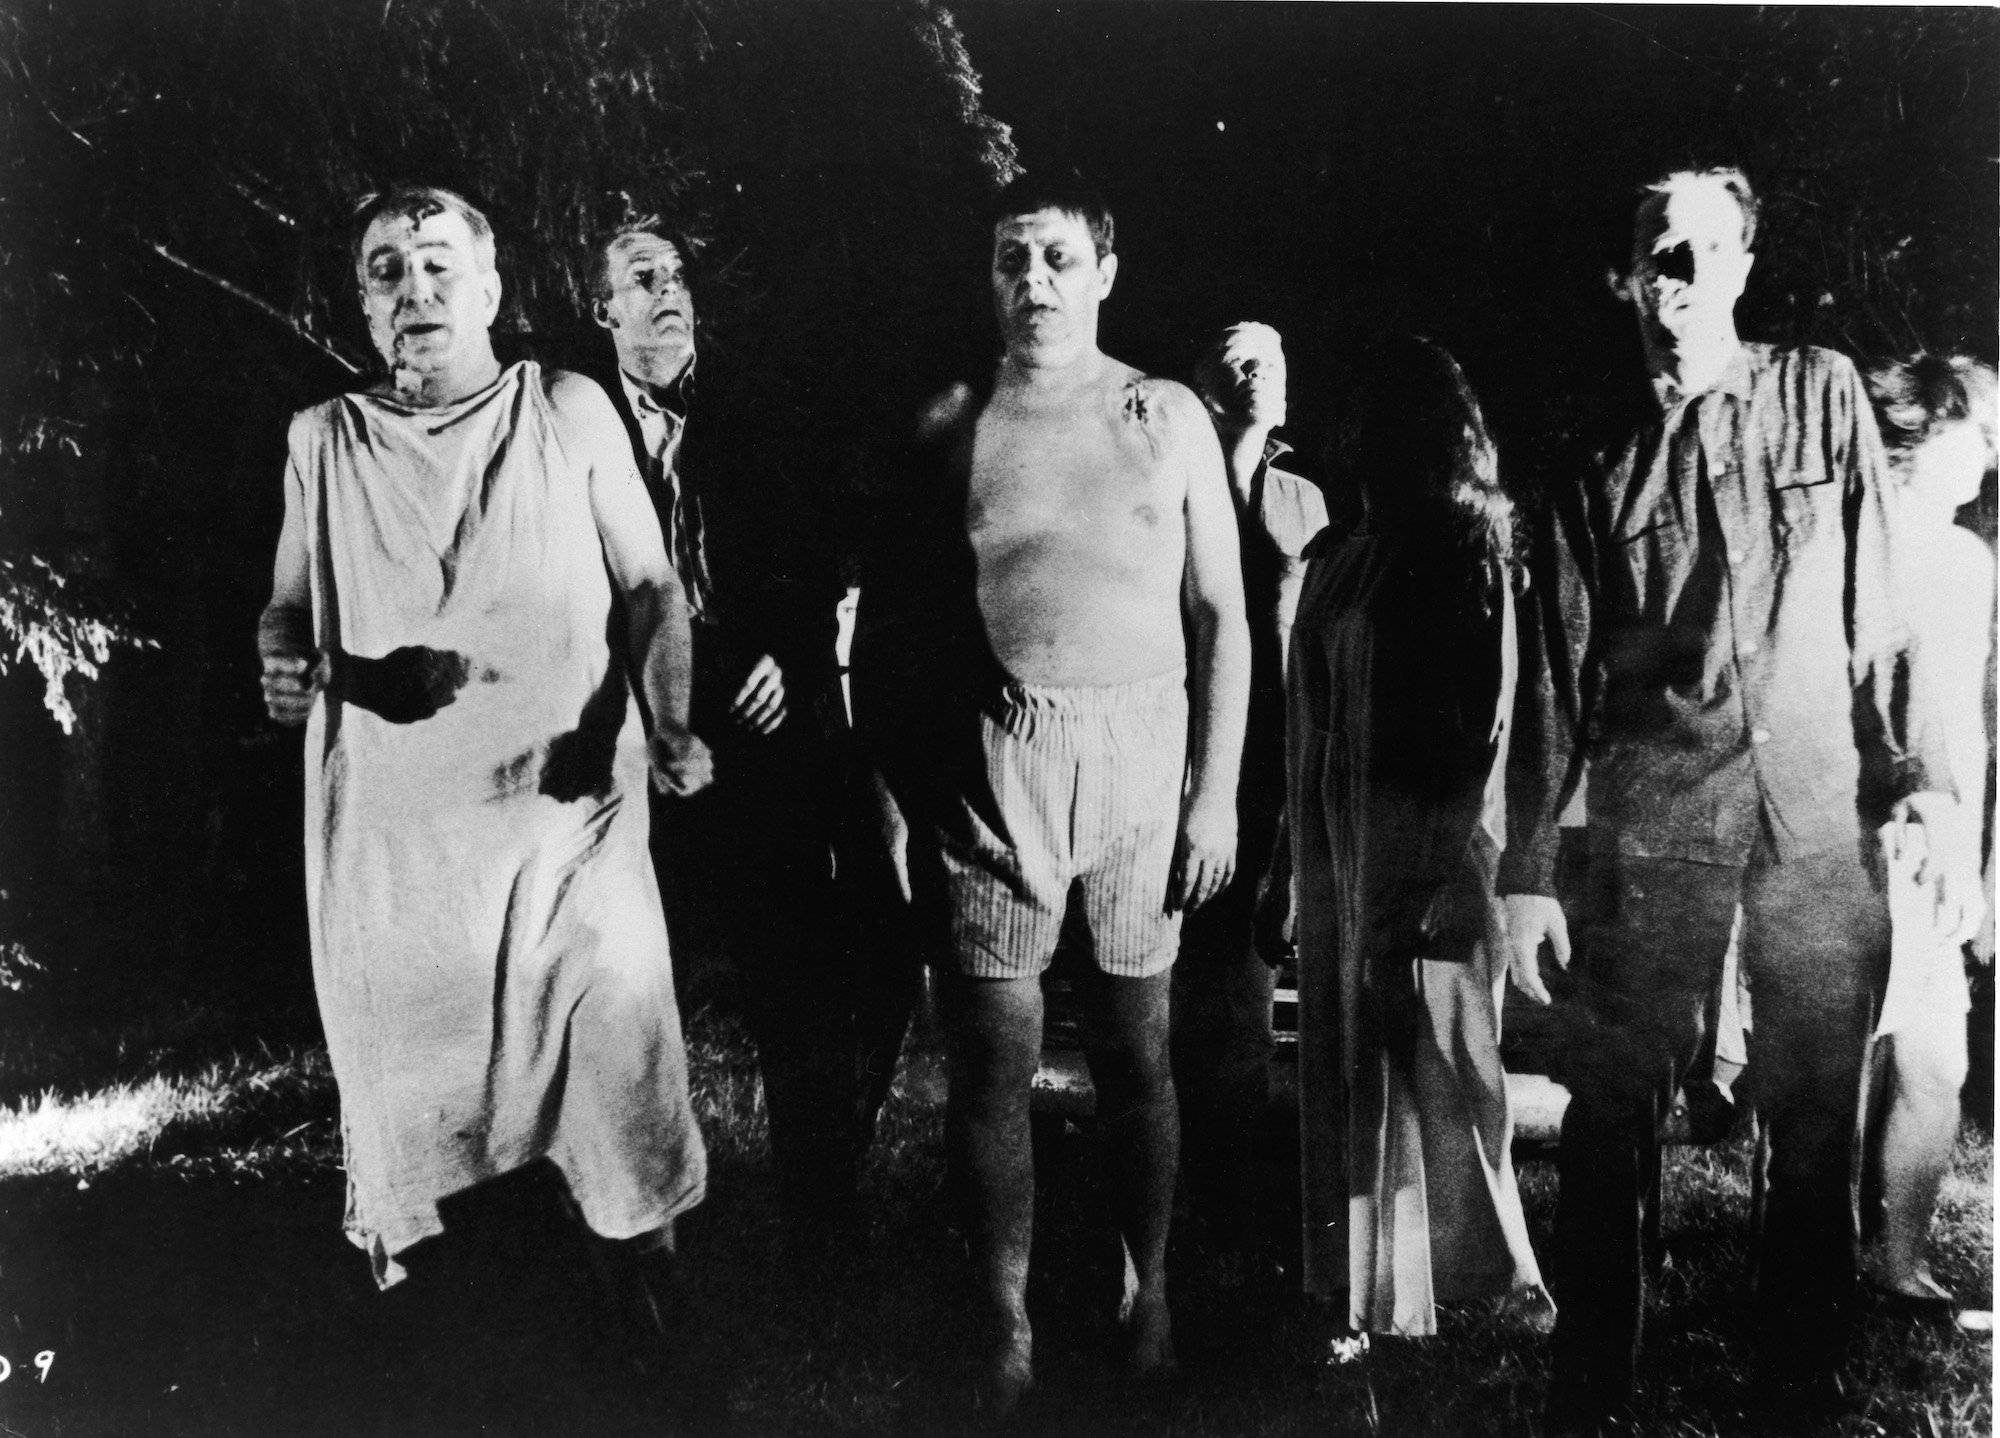 'Night of the Living Dead' zombies walk out of the cemetery